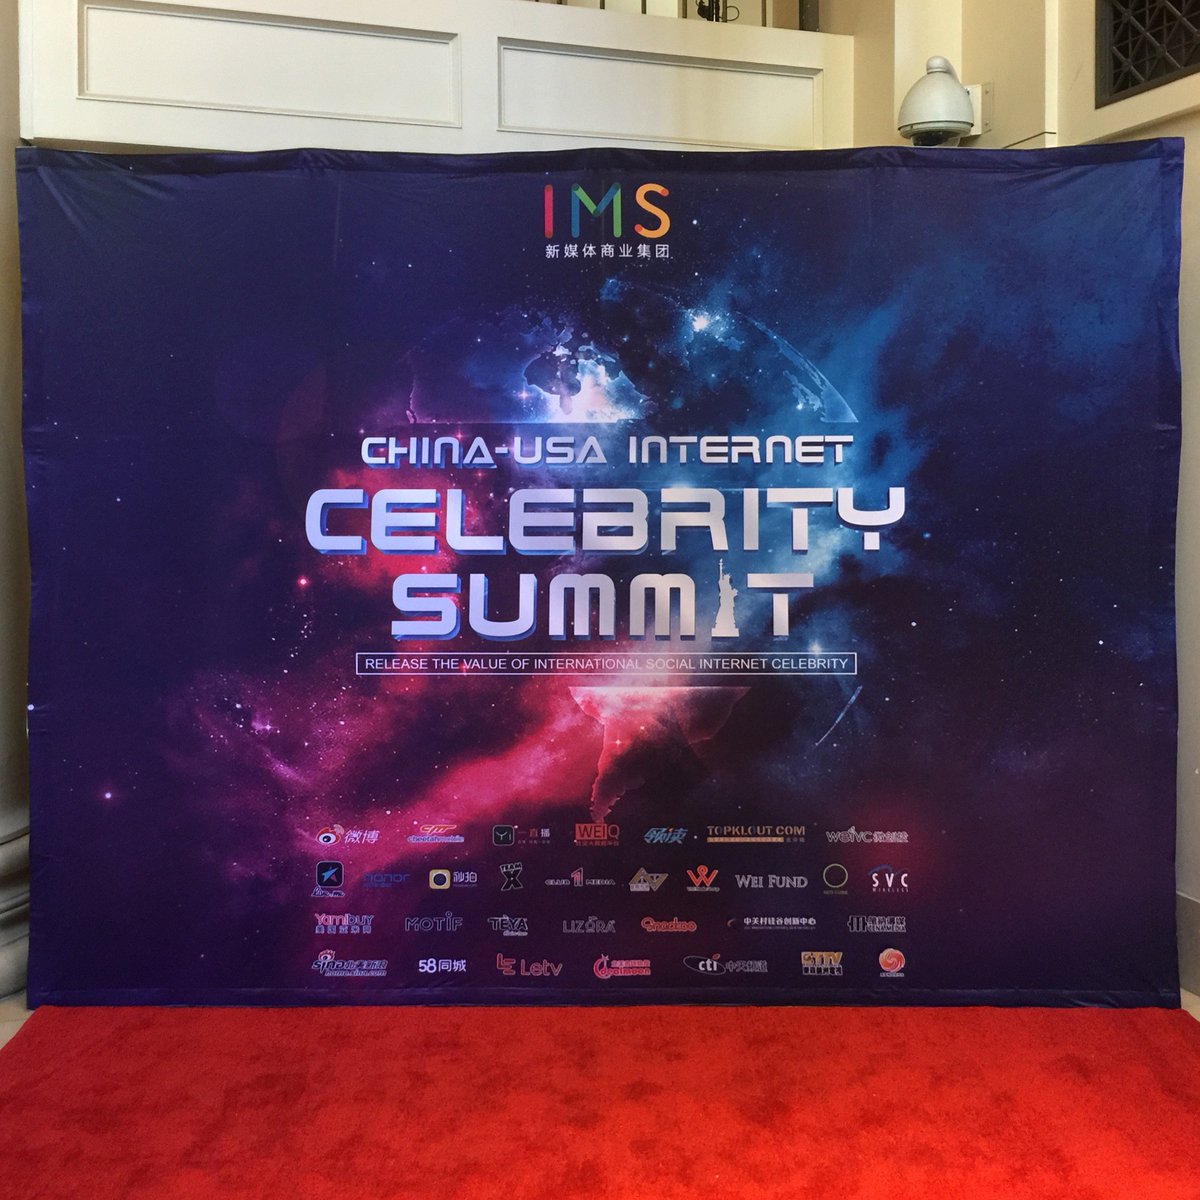 Live from IMS group’s China US Internet Celebrity Summit at San Francisco.